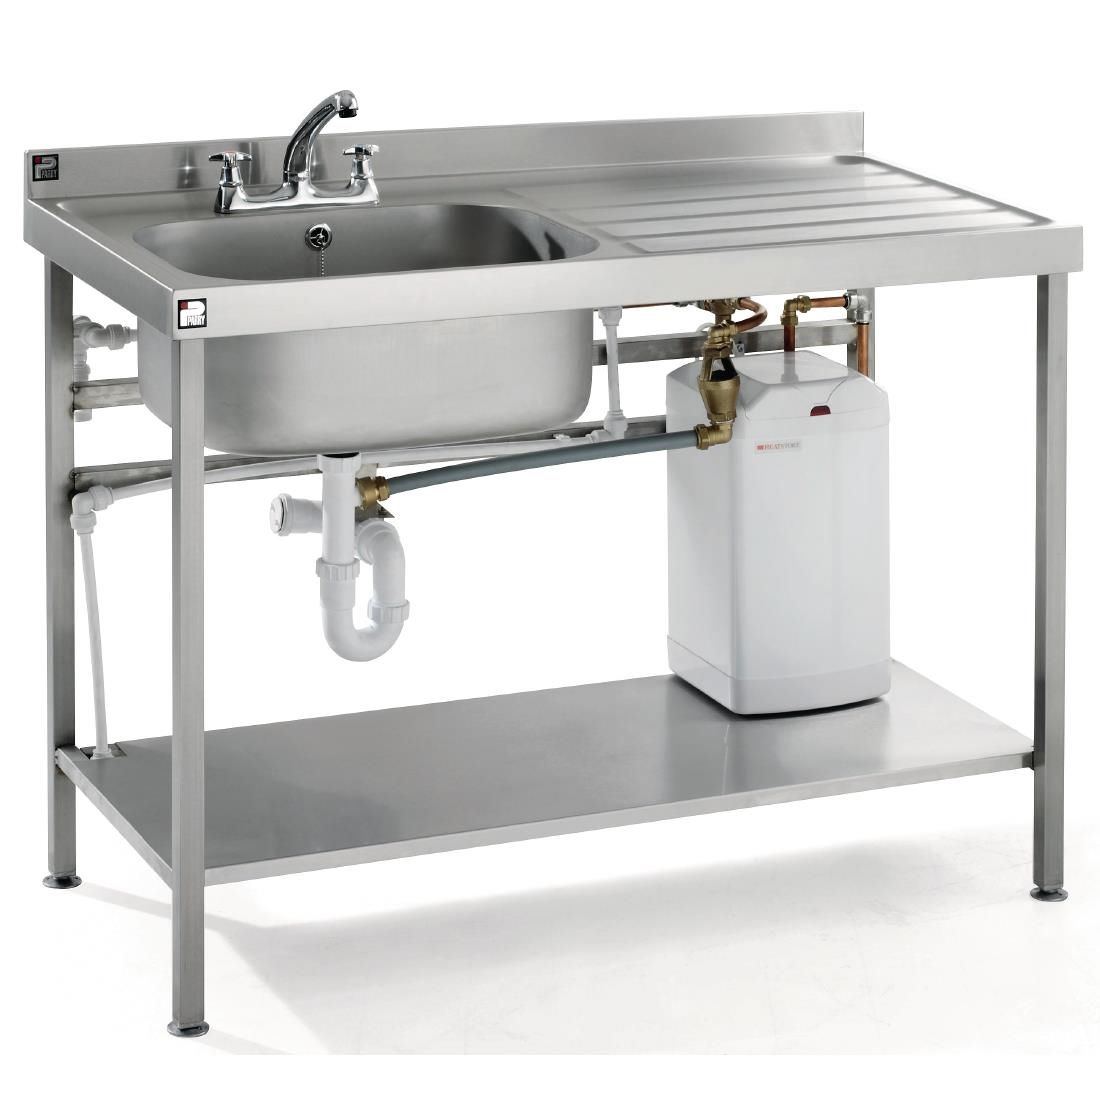 Parry Stainless Steel Fully Assembled Sink Right Hand Drainer 1400mm